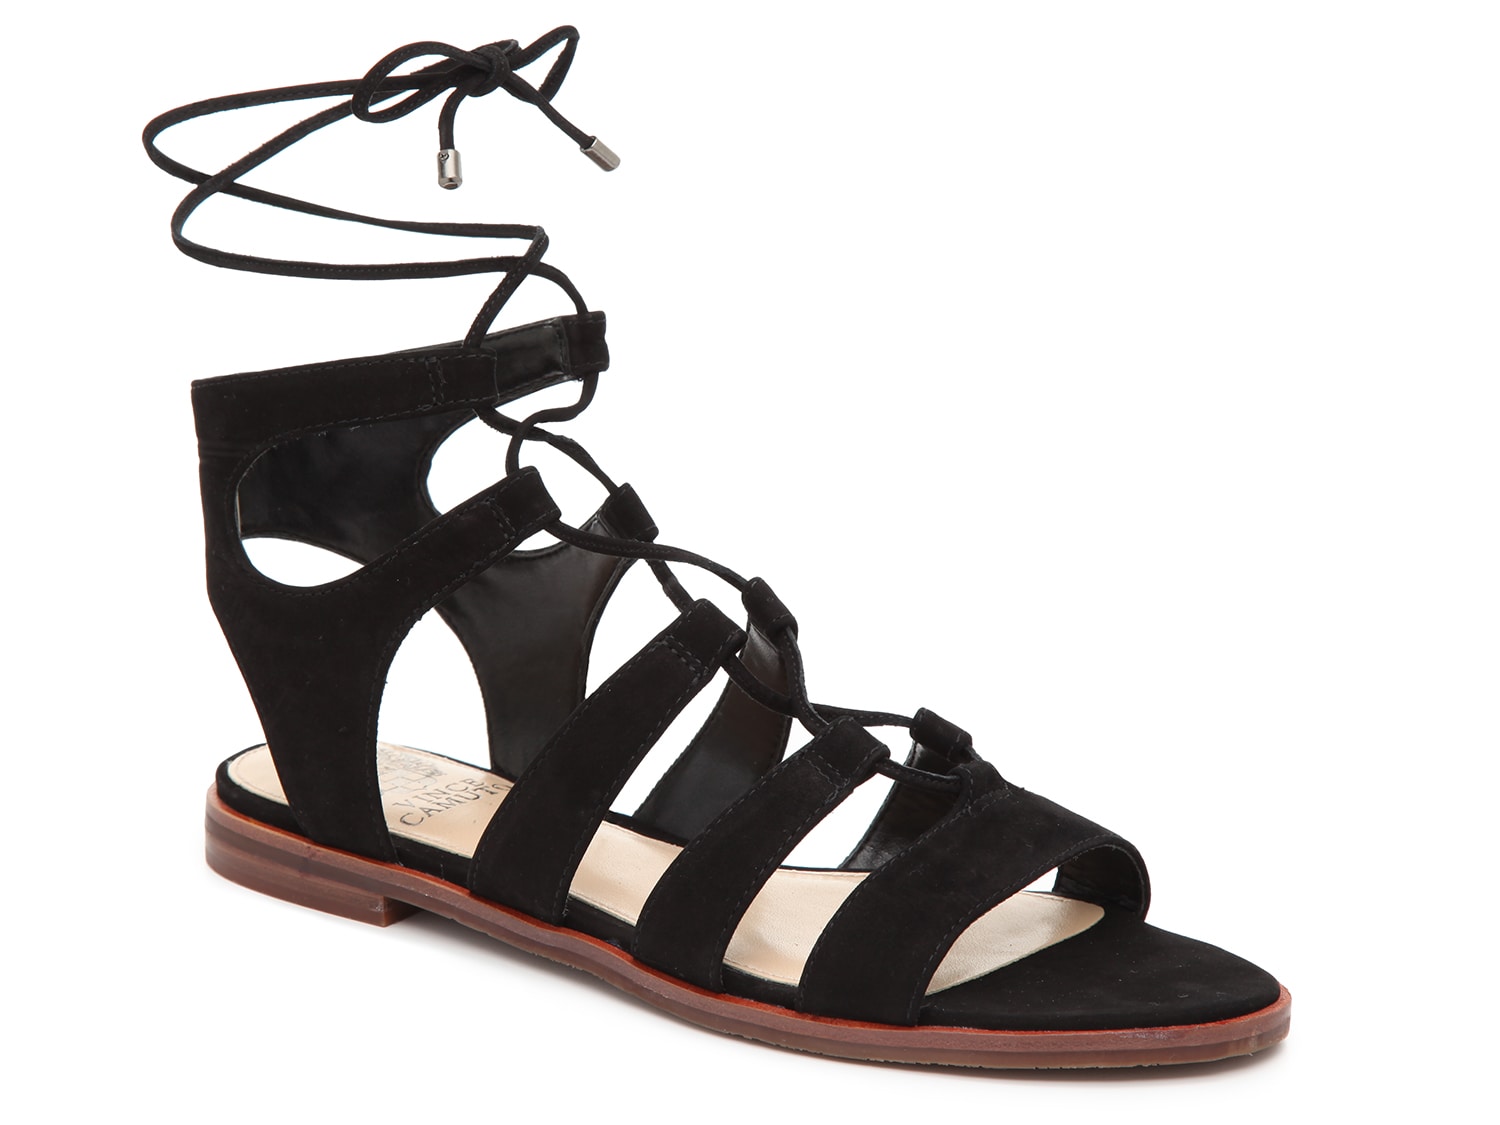 Vince Camuto Tany Sandal - Free Shipping | DSW